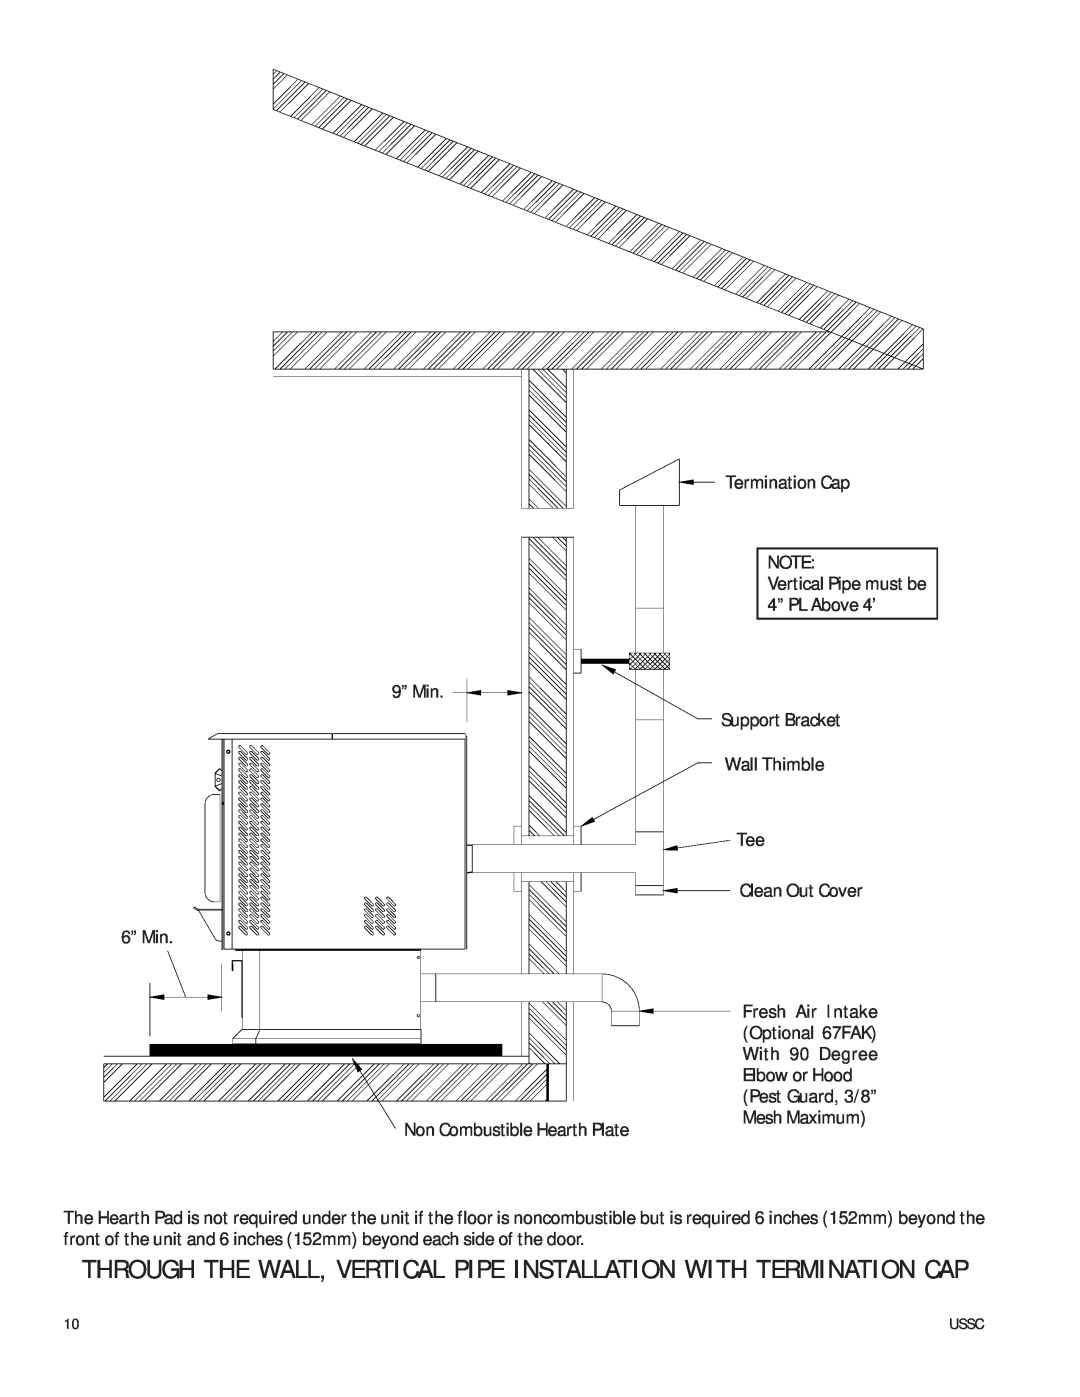 United States Stove 6037 owner manual Through The Wall, Vertical Pipe Installation With Termination Cap 